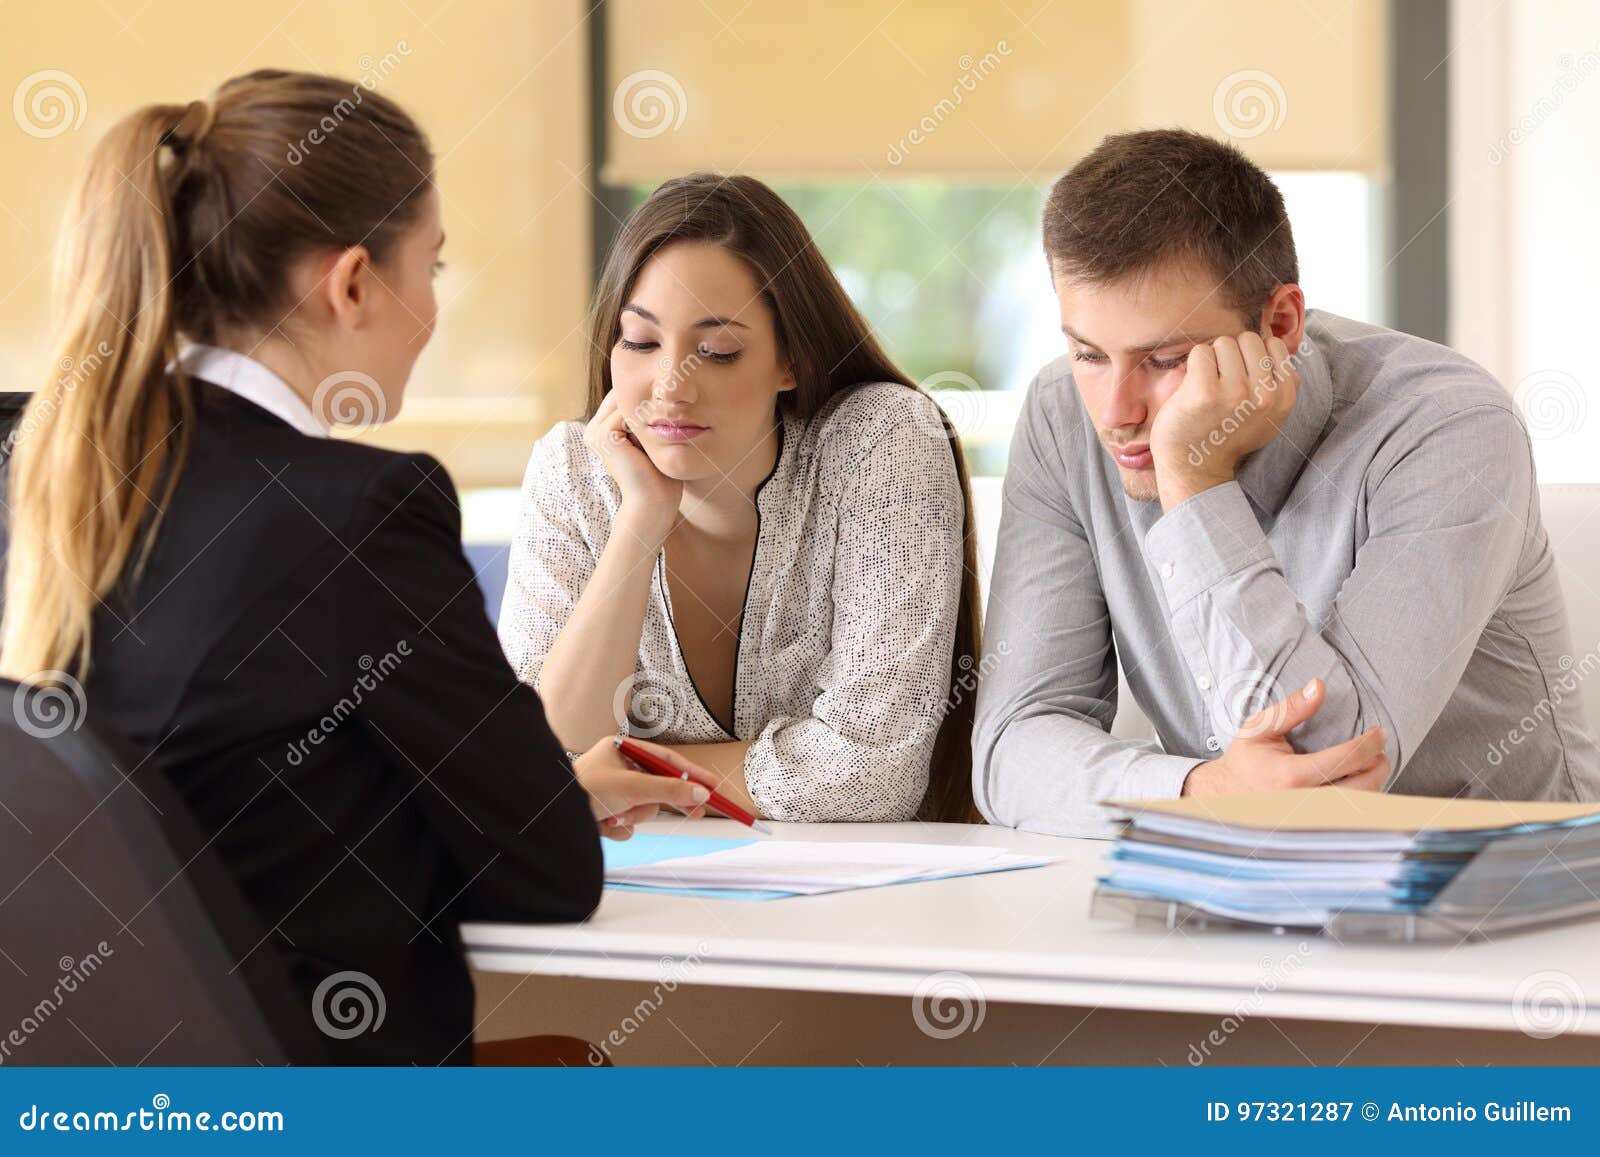 bad saleswoman with unconvinced customers